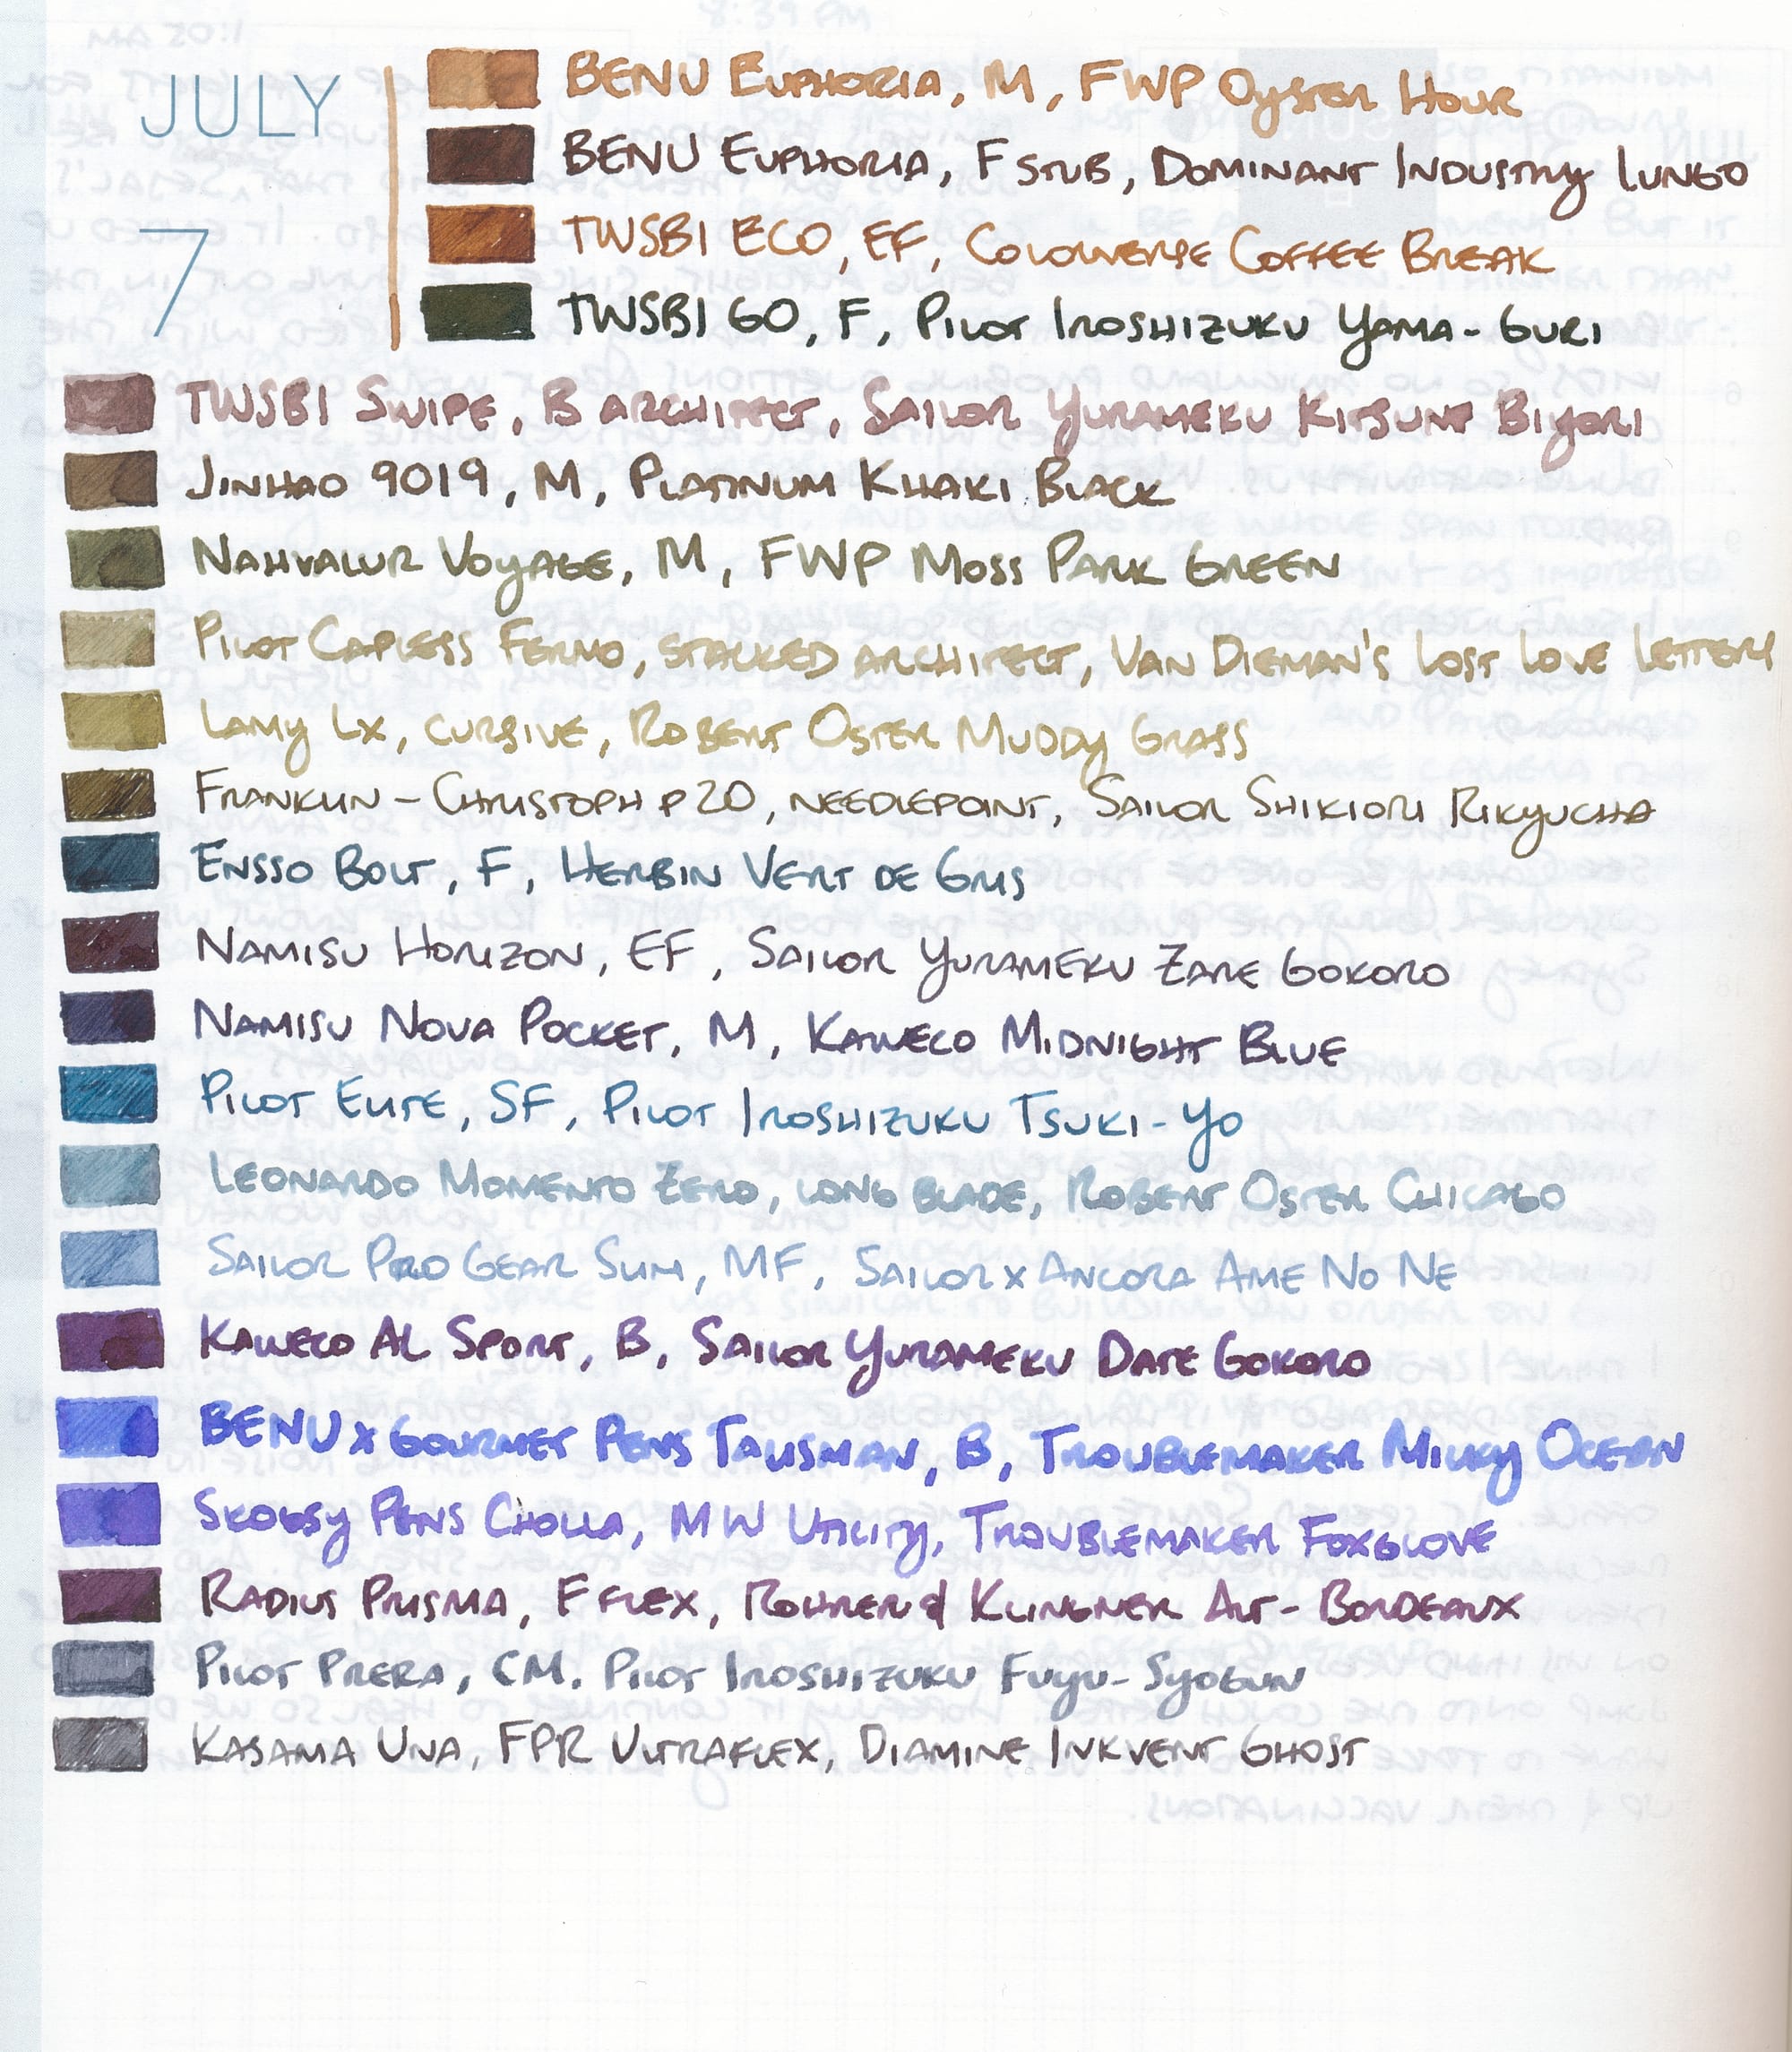 Various fountain pen ink swatches, drawn and filled in rectangles with the pen and ink combo written out